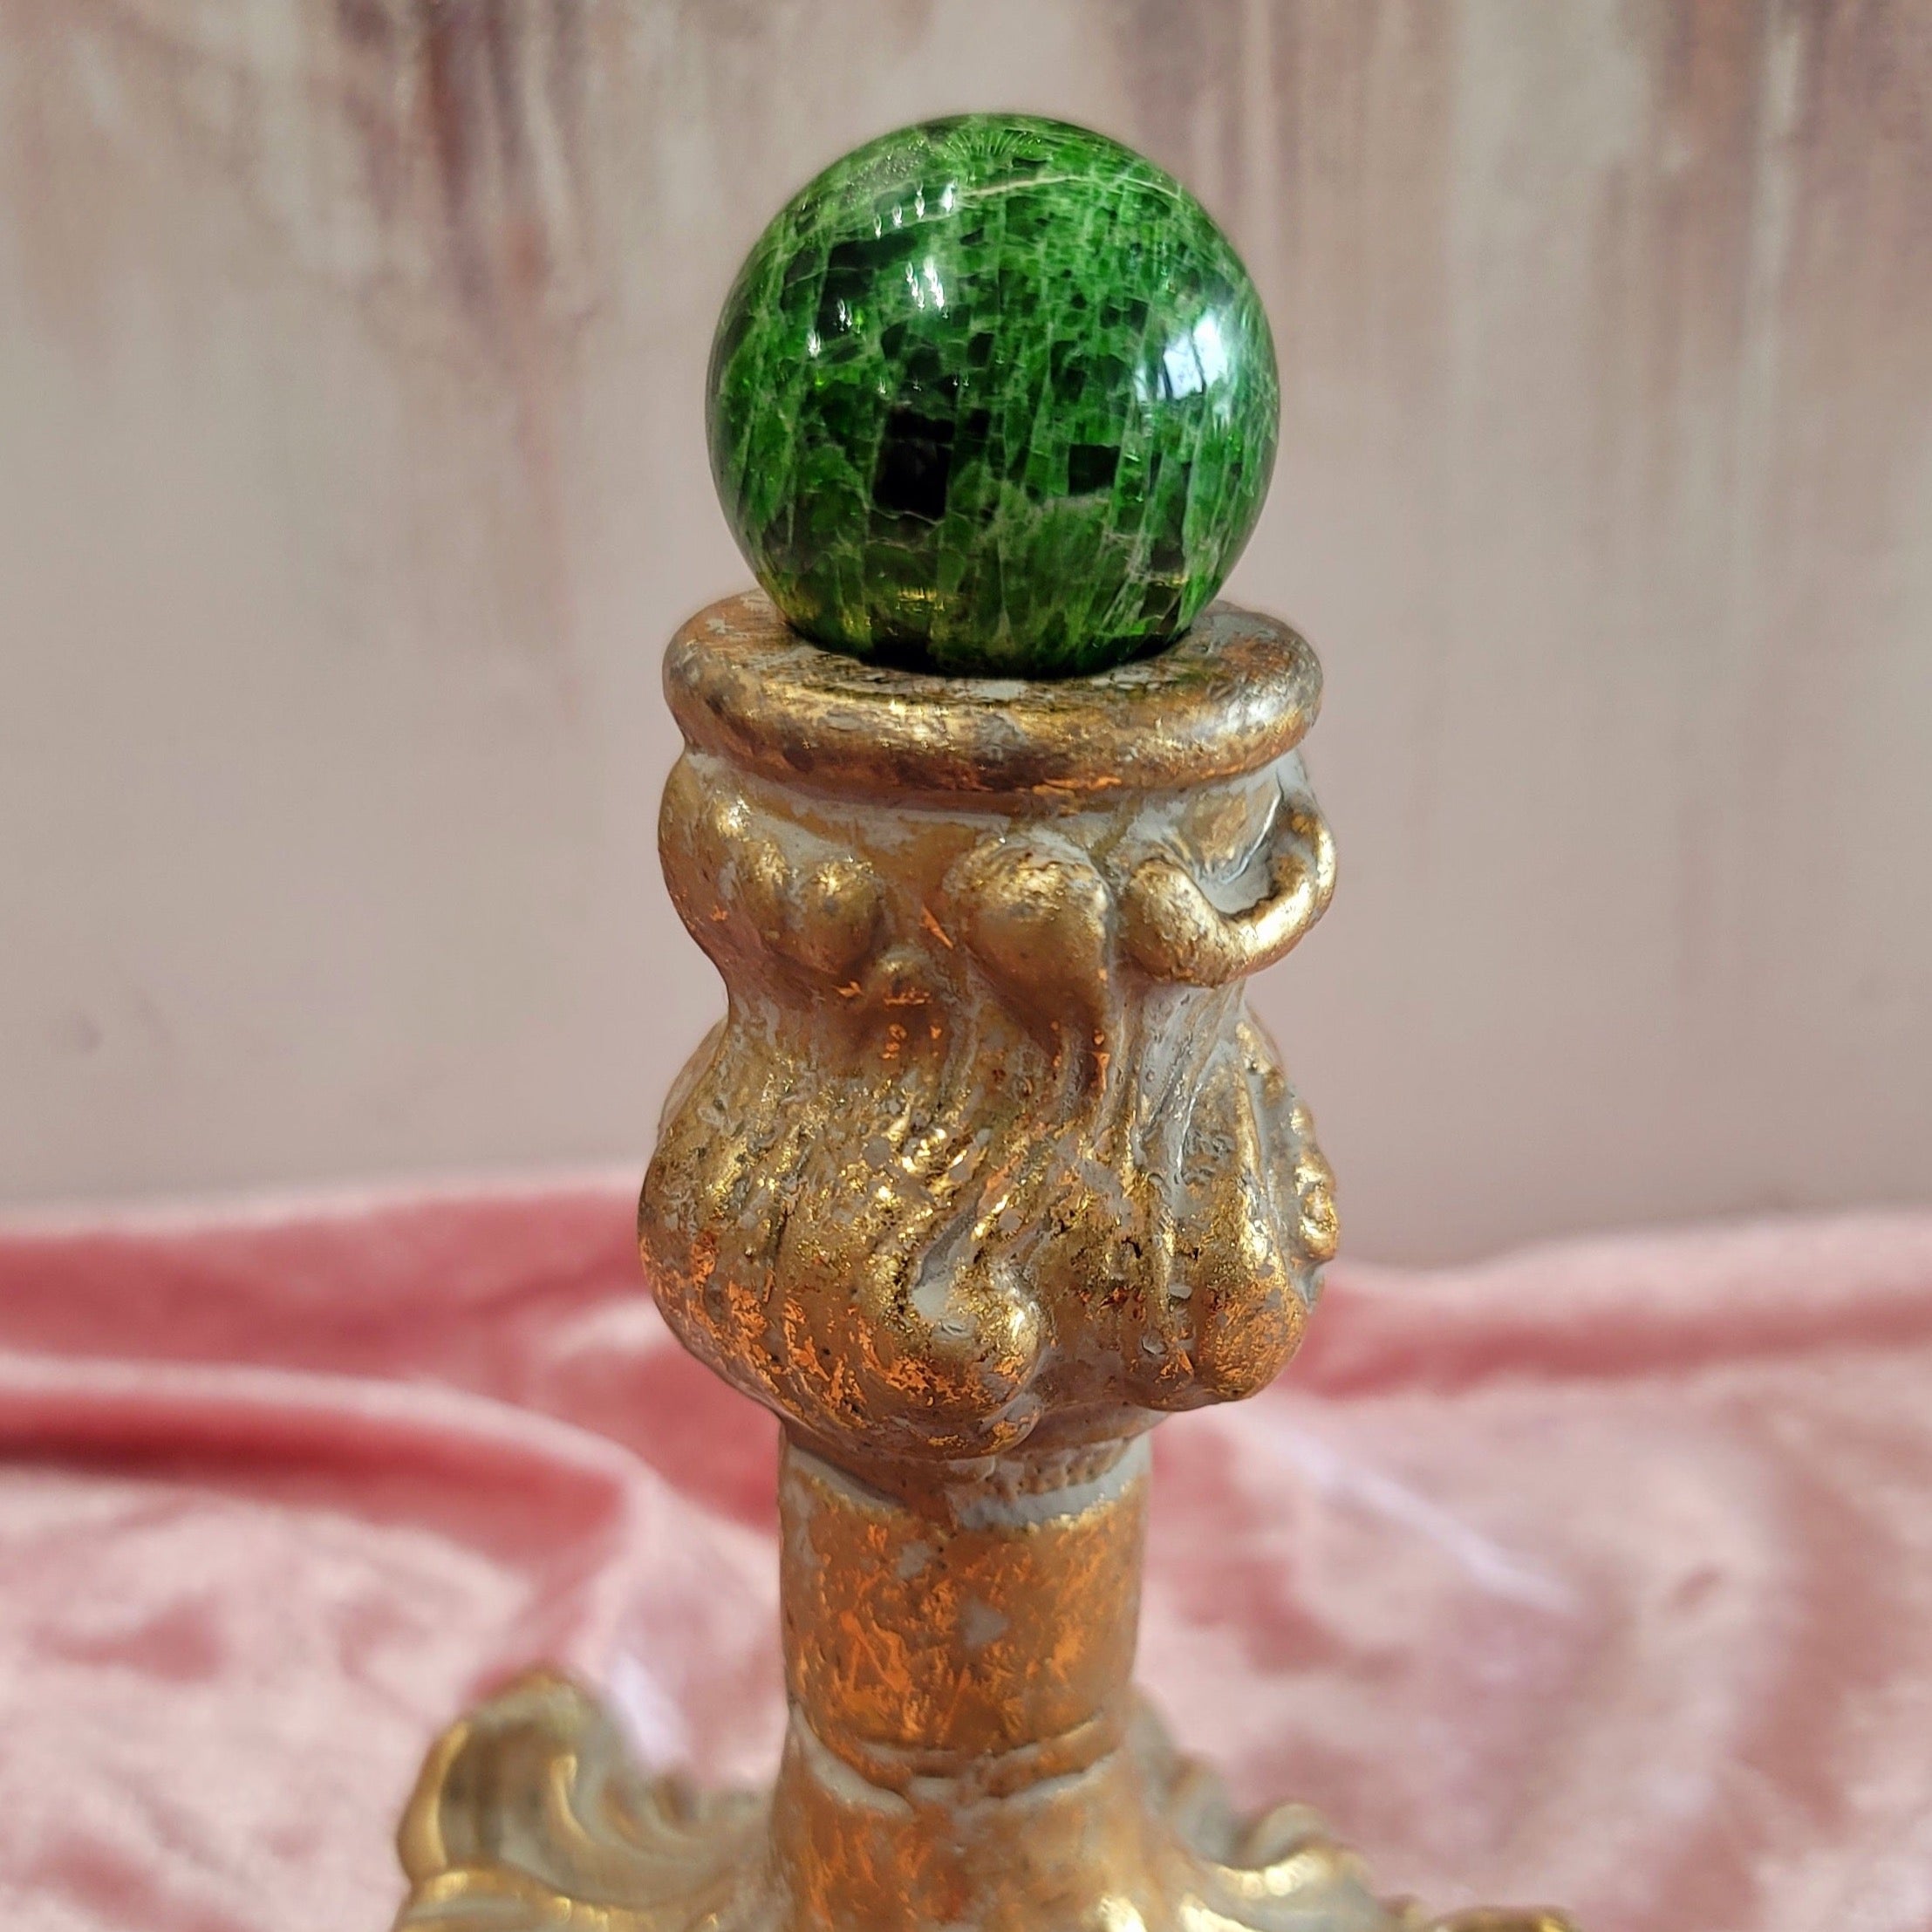 Chrome Diopside Sphere (Extremely Rare)